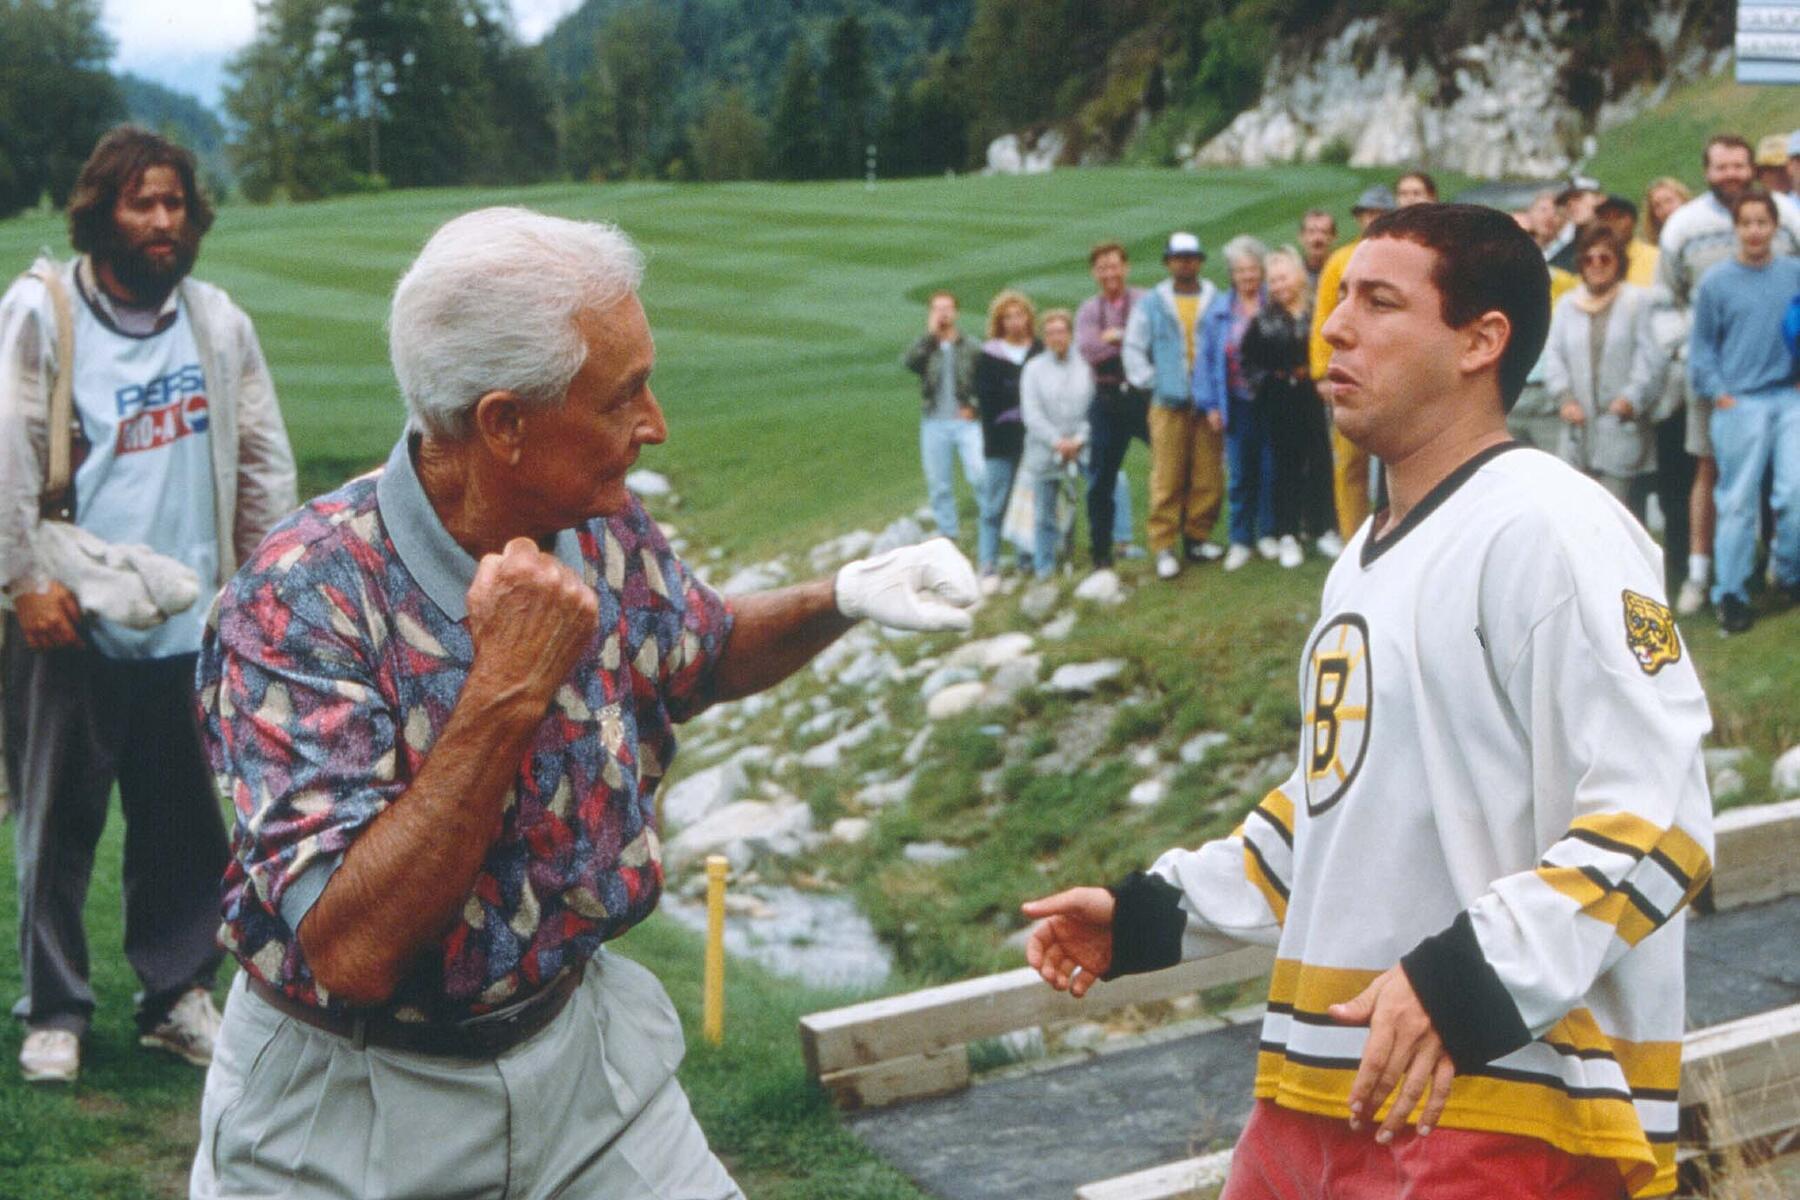 Happy Gilmore (1996)
Directed by Dennis Dugan 
Shown from left: Bob Barker (as himself), Adam Sandler (as Happy Gilmore)